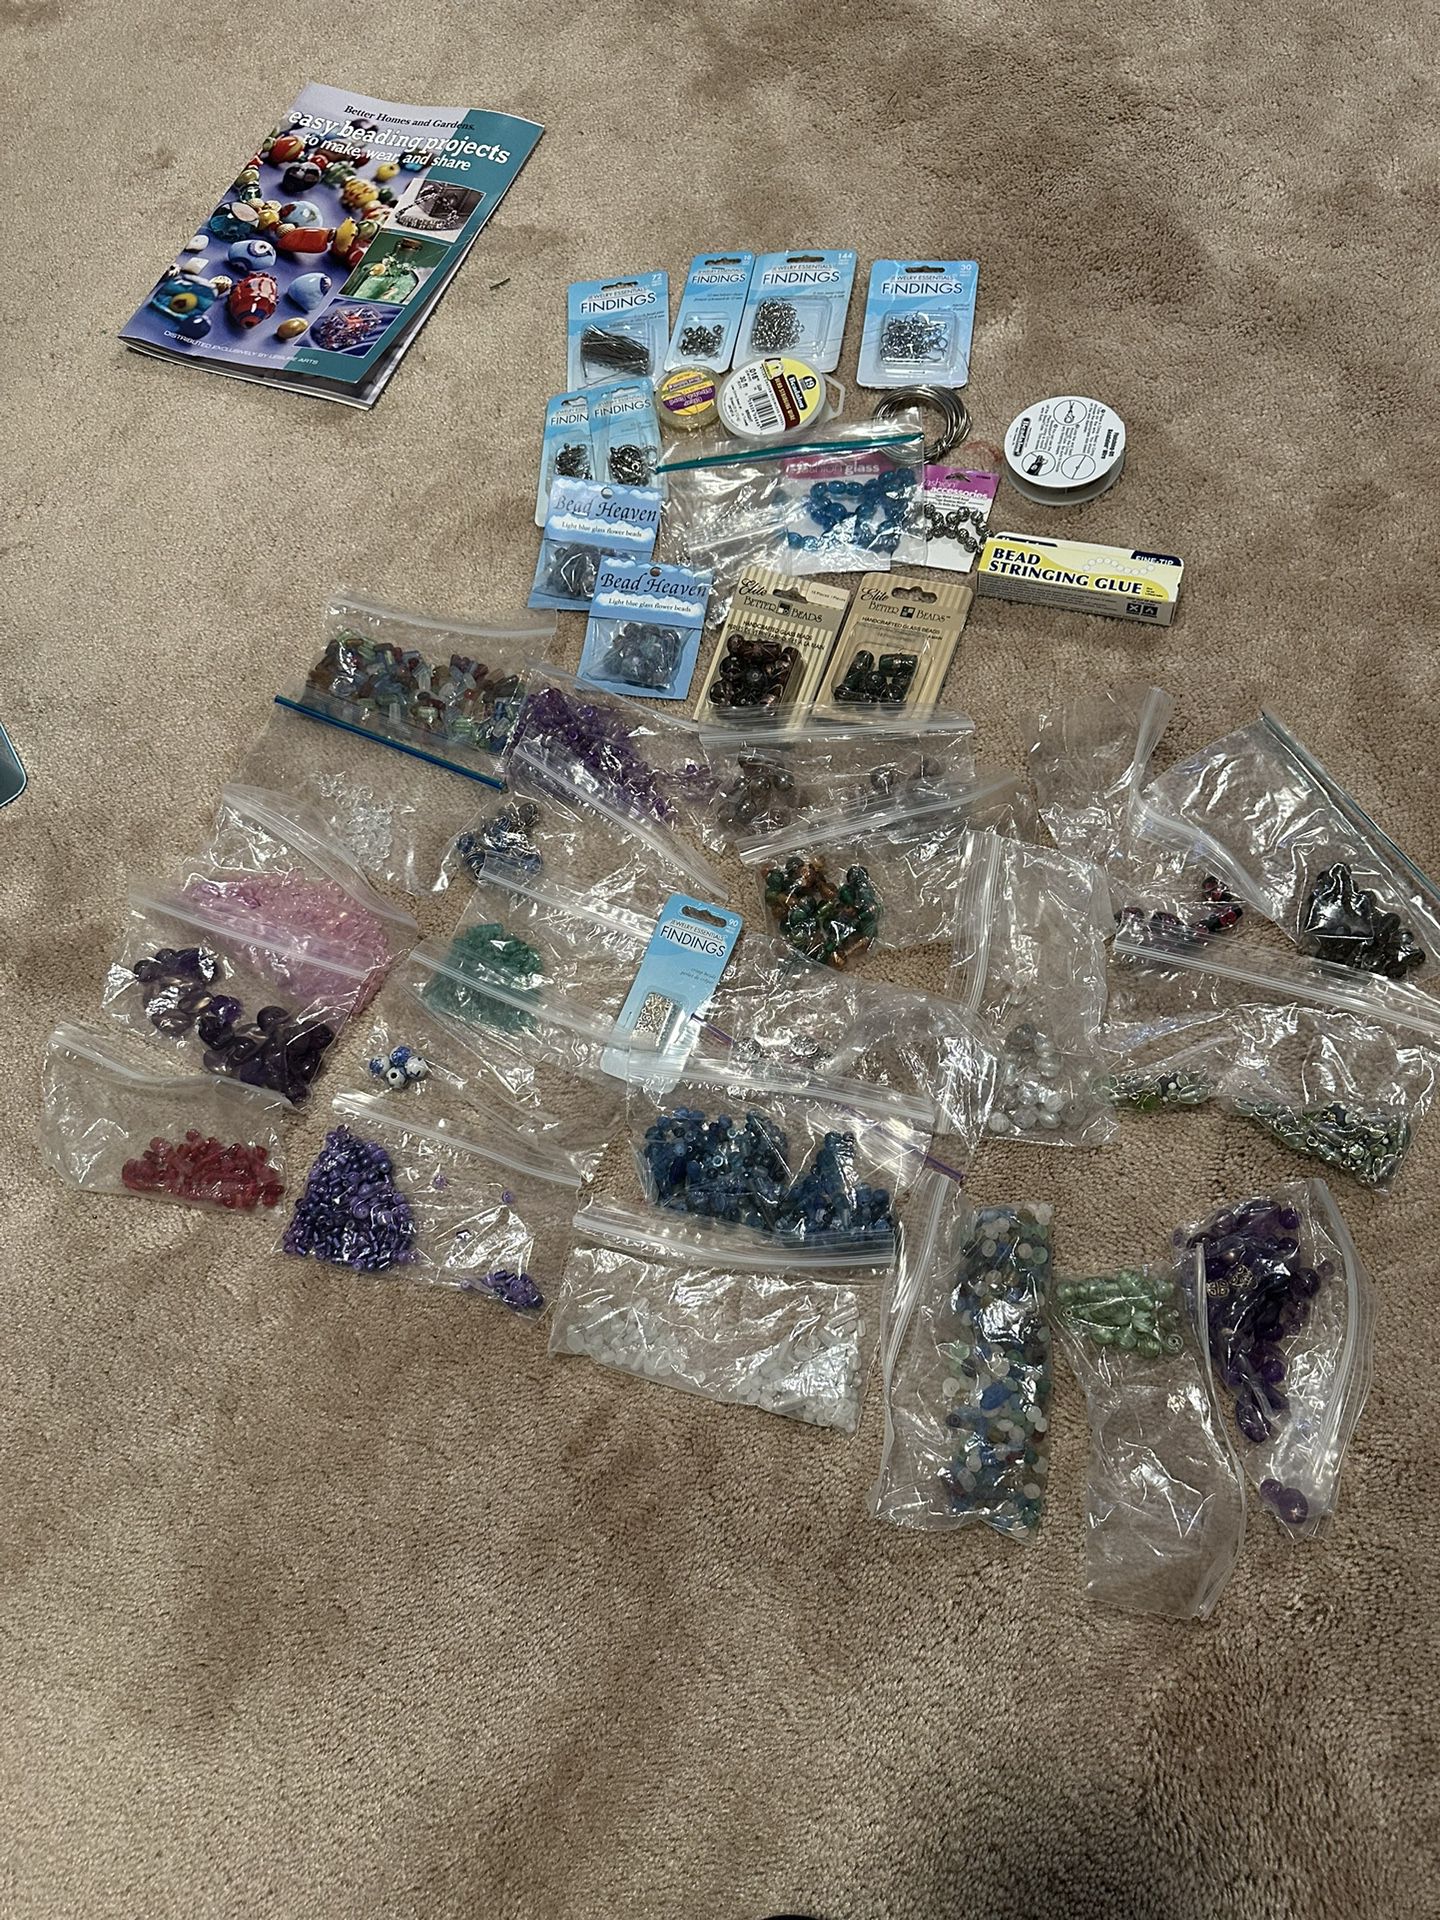 Jewelry Beads And Supplies